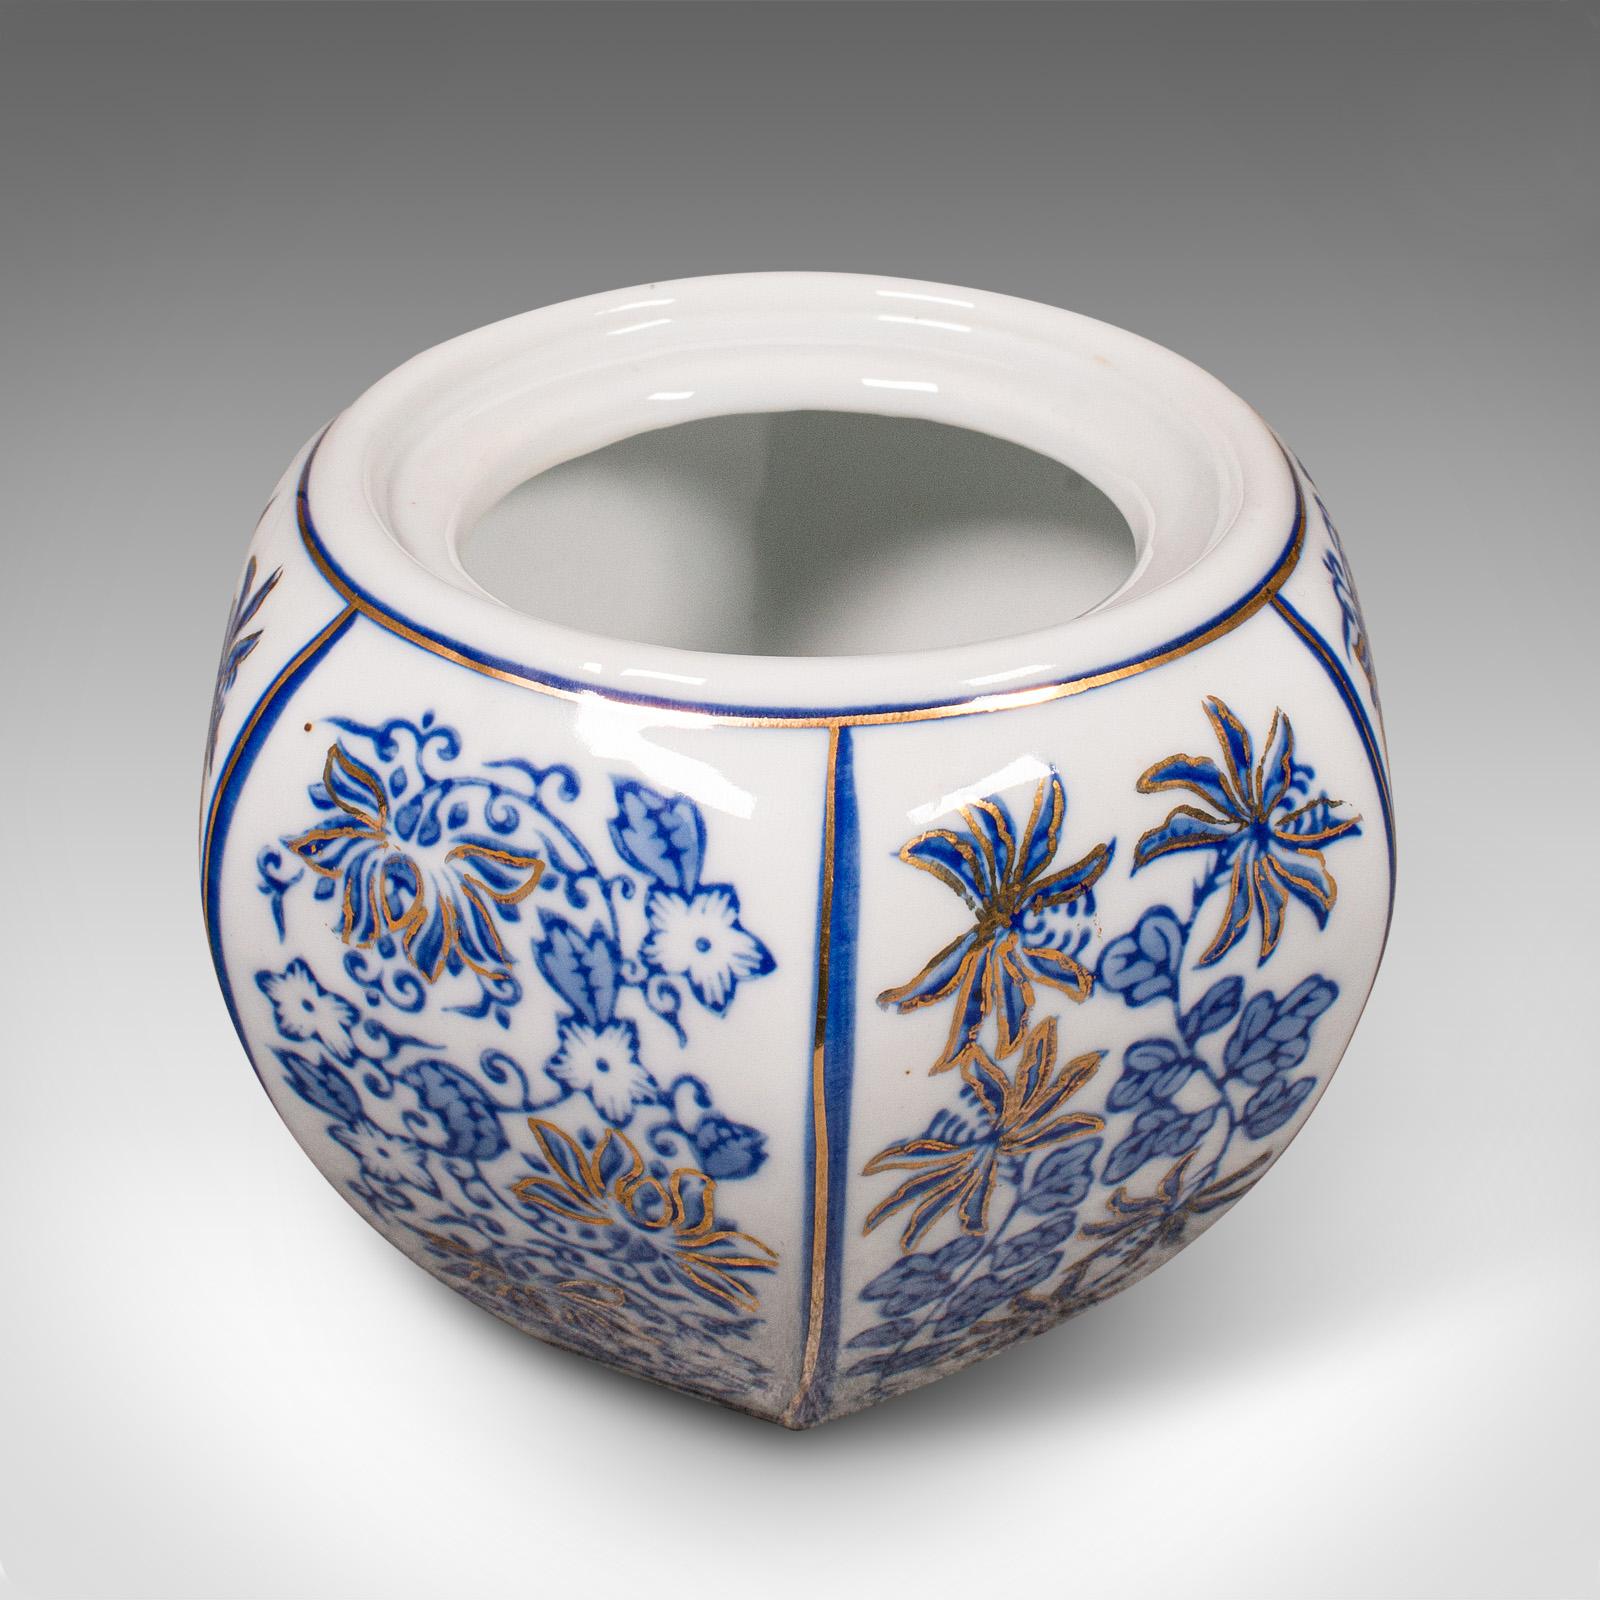 This is a vintage blue and white spice jar. A Chinese, ceramic decorative pot, dating to the late Art Deco period, circa 1940.

Appealing in colour and form, with a charming decorative appearance
Displays a desirable aged patina throughout
White